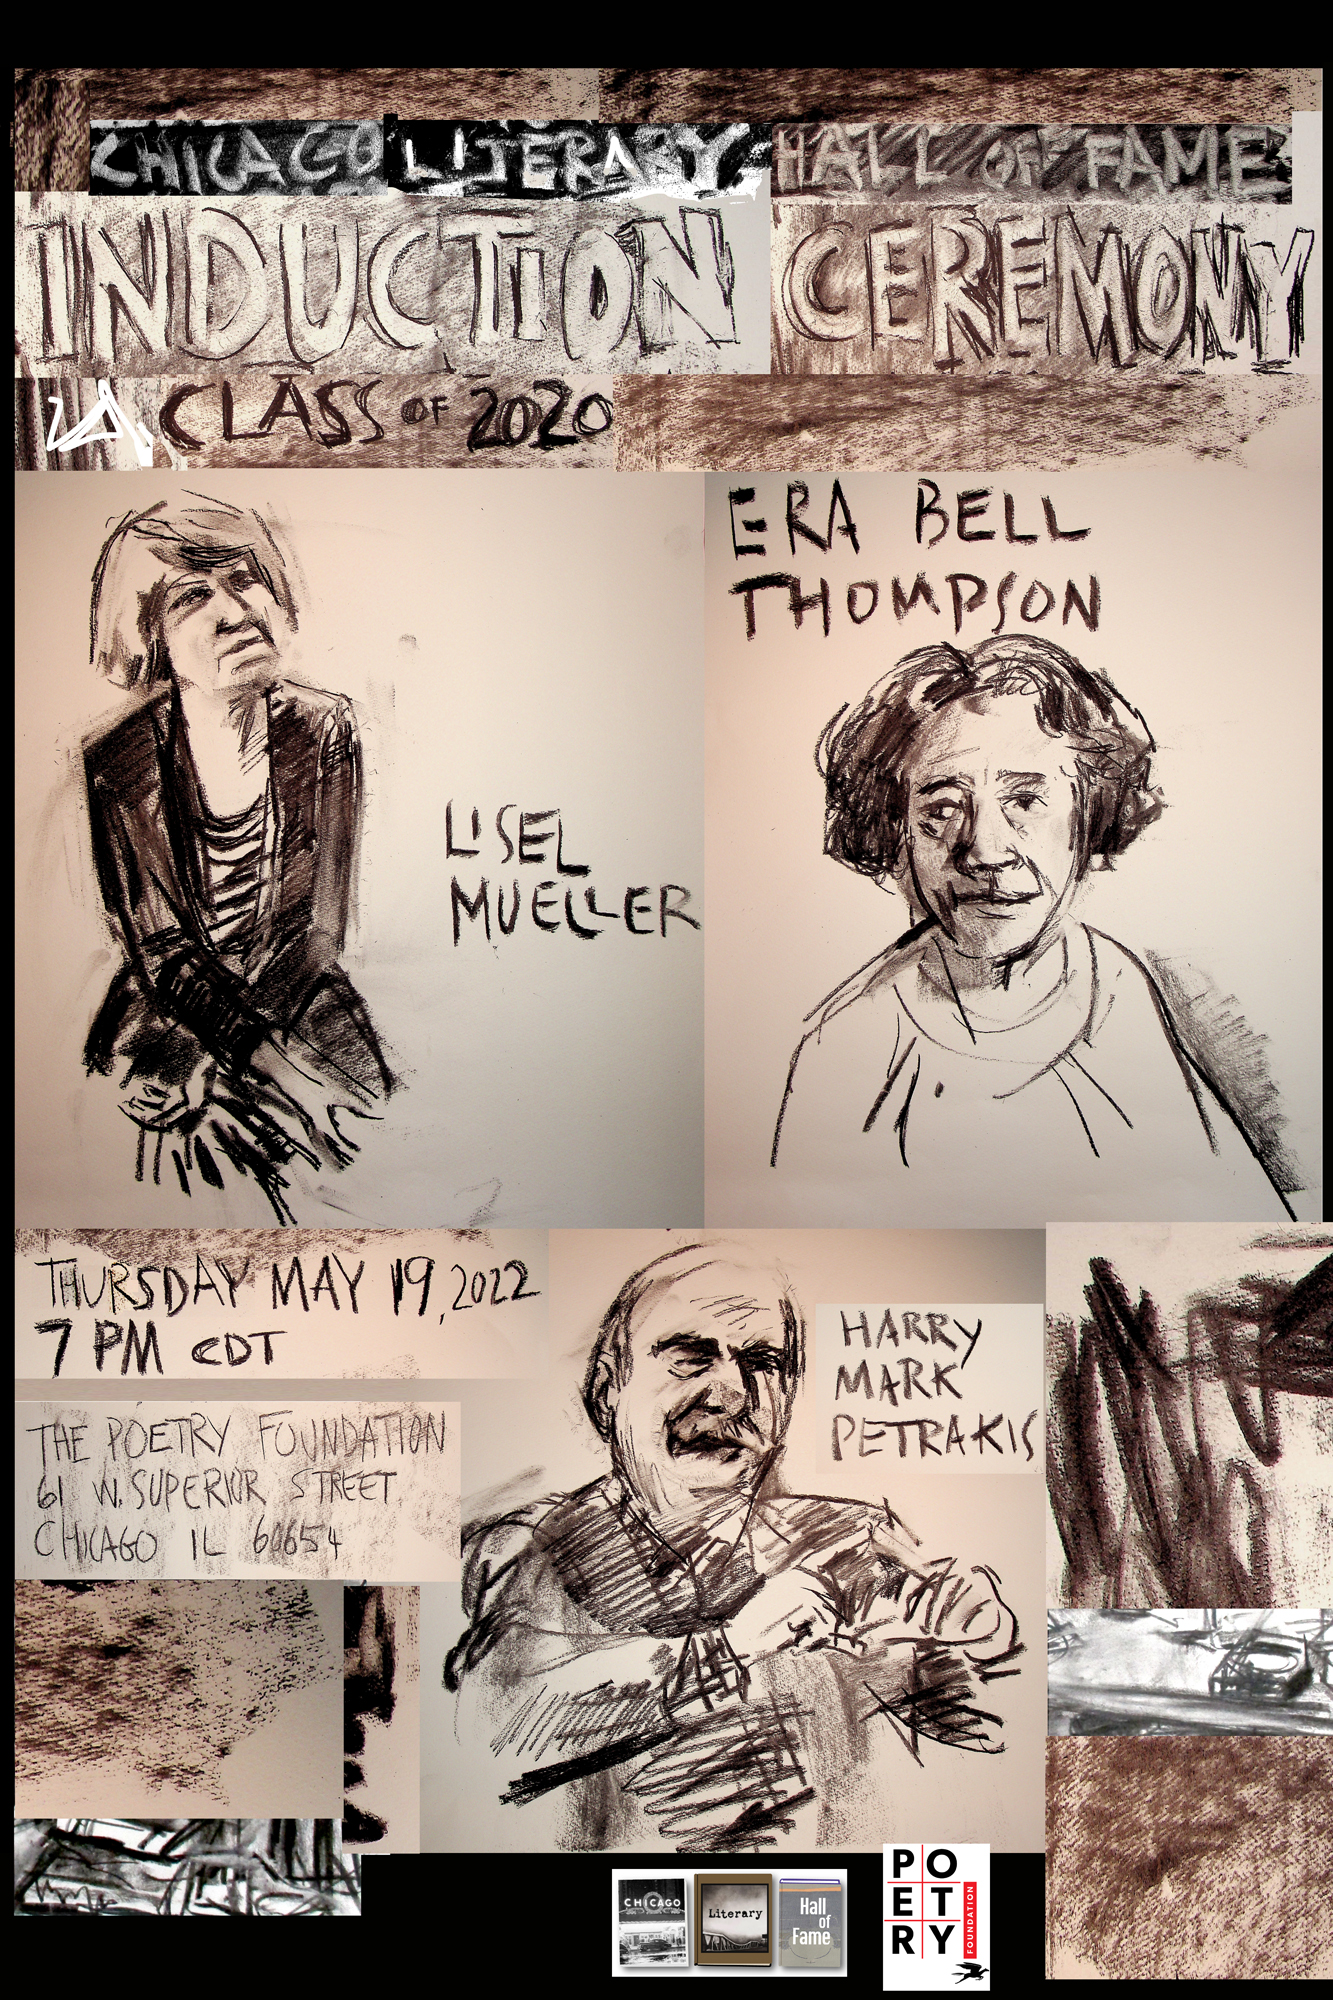 Chicago Literary Hall of Fame Class of 2020 Poster featuring Harry Mark Petrakis, Era Bell Thompson, and Lisel Mueller